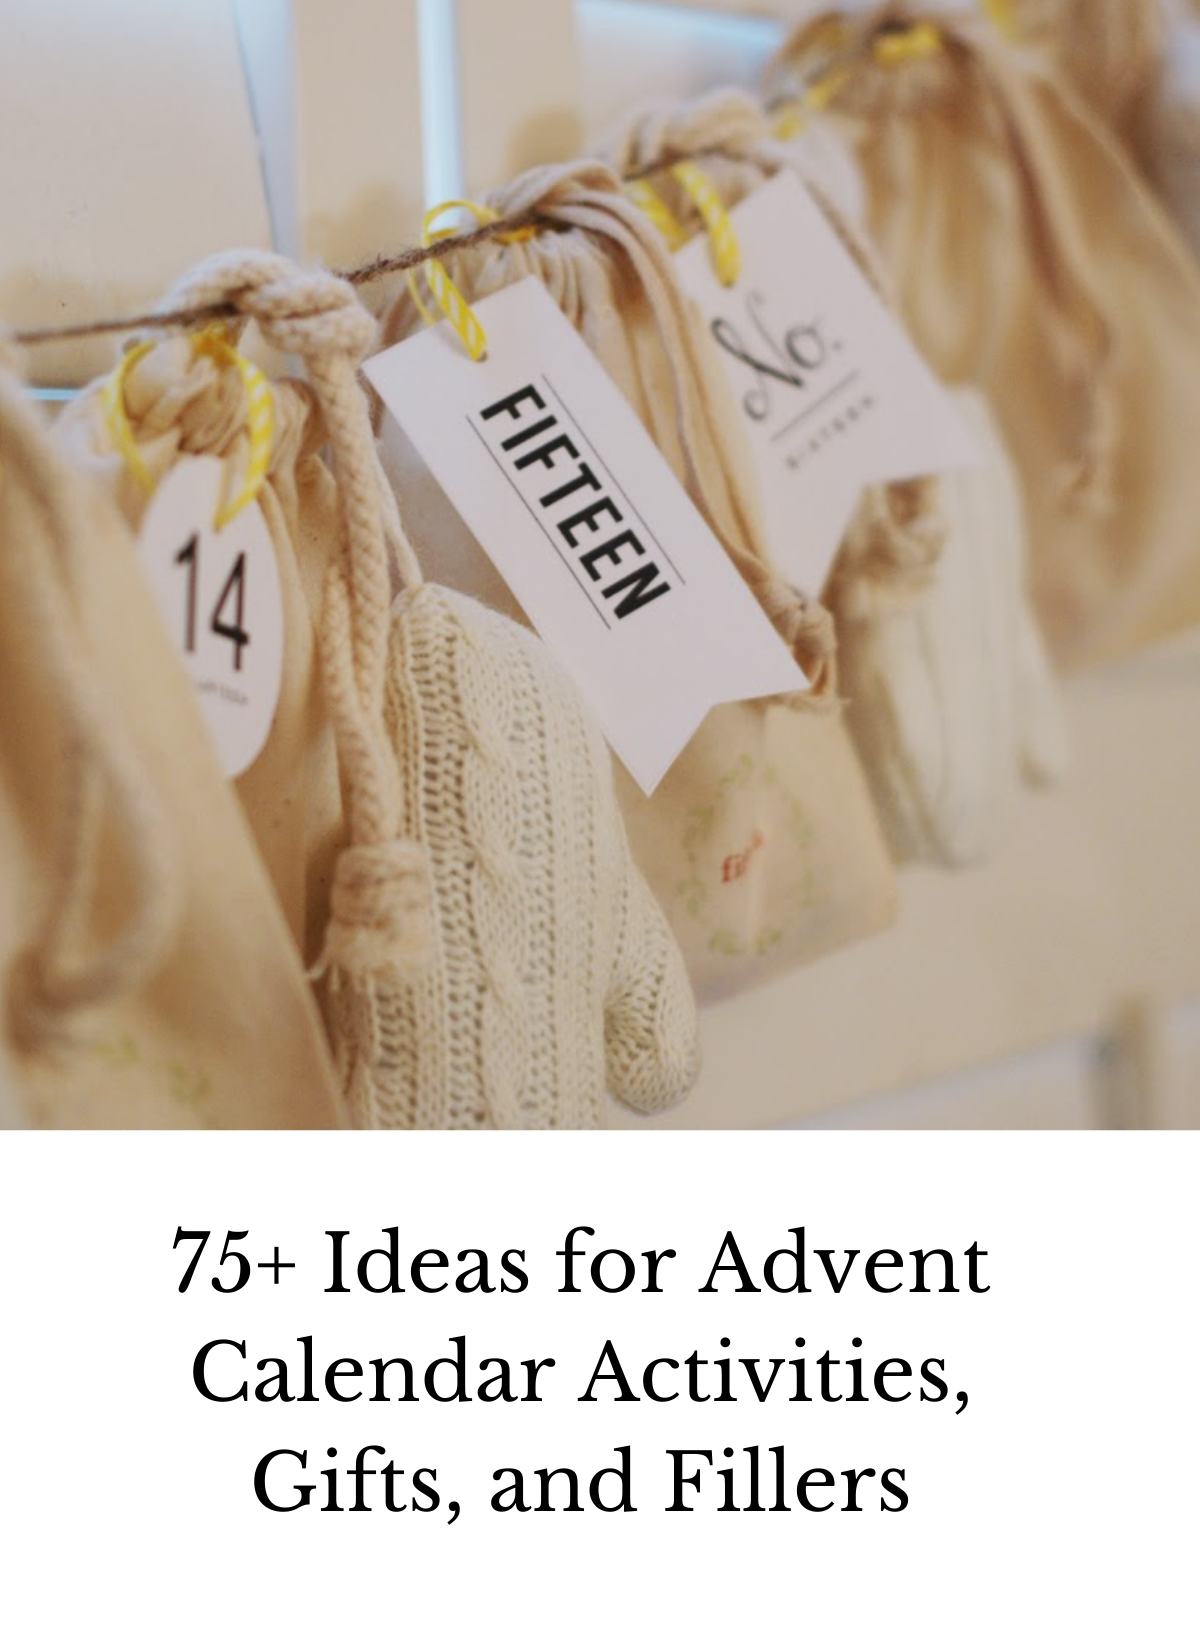 ideas for advent activities fillers gifts